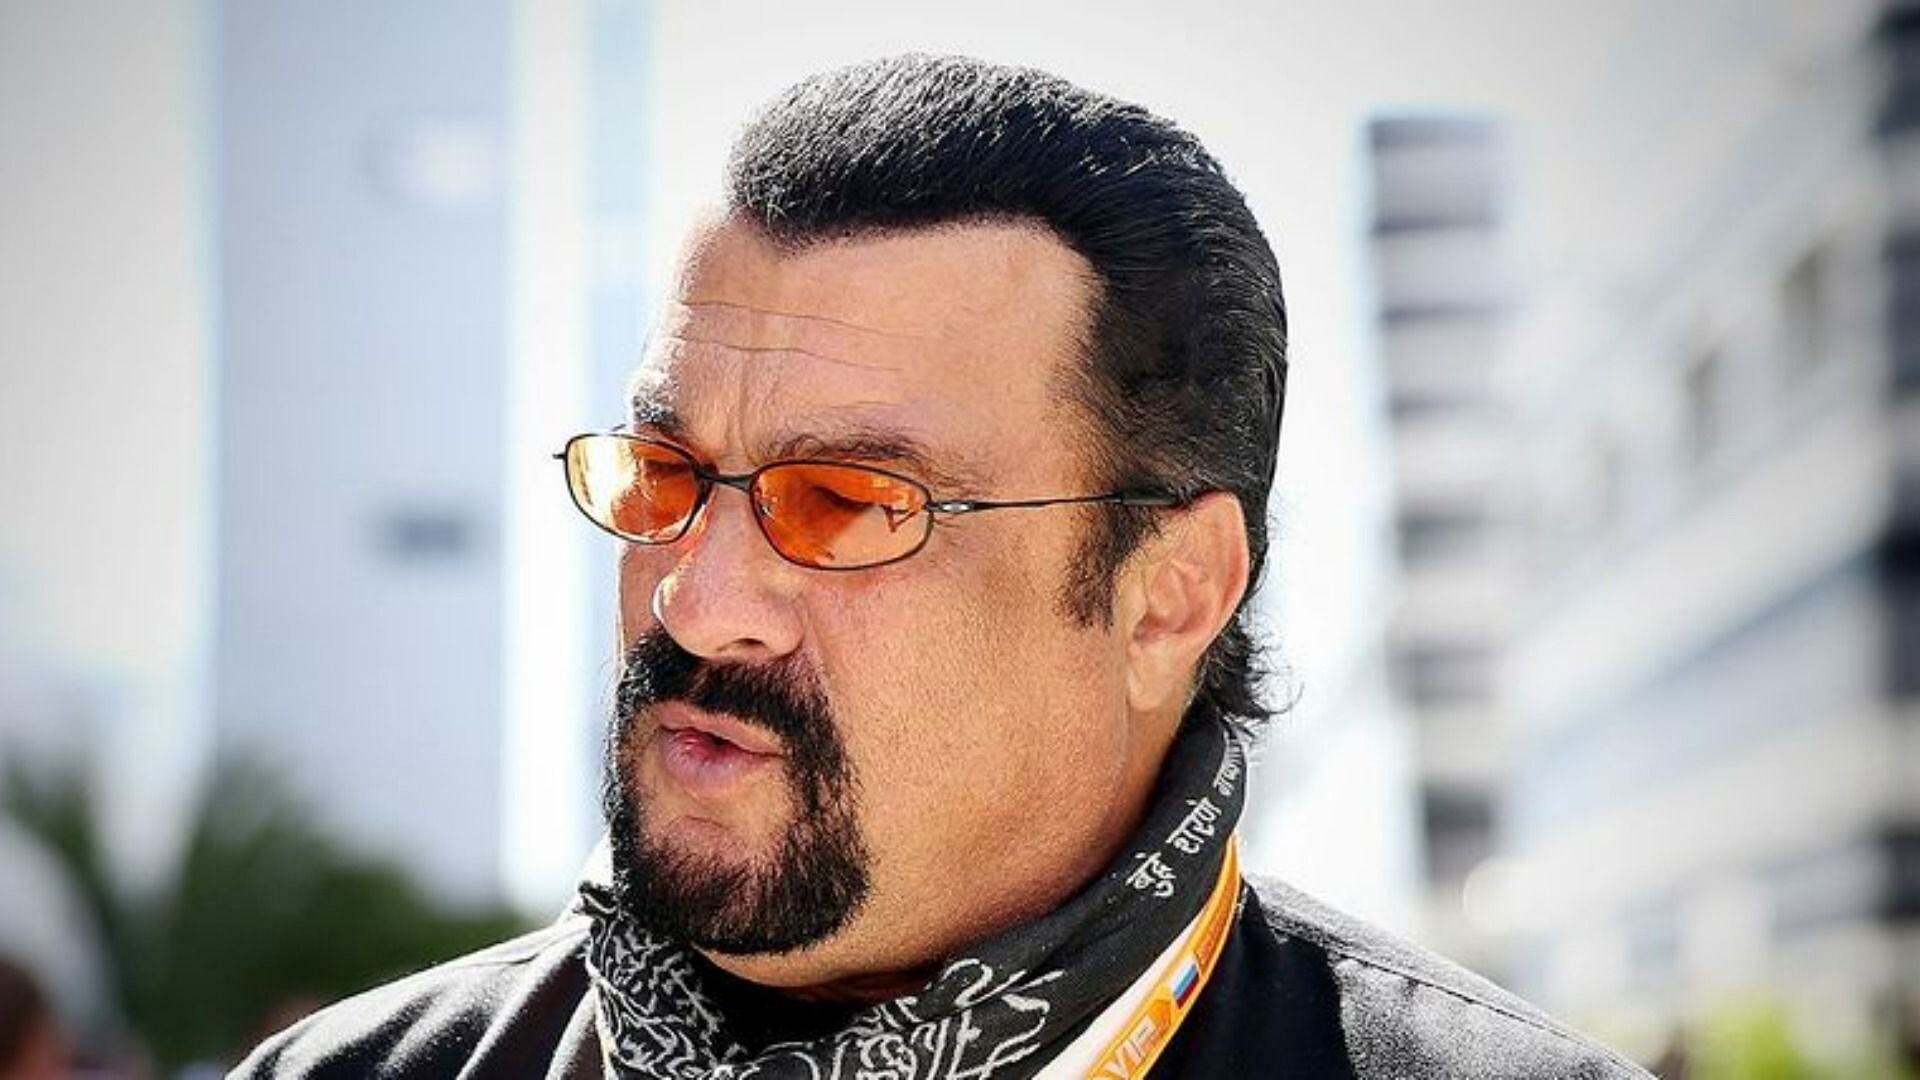 Steven Seagal: A Russian citizen, Backing Russian president, Appointed as Russian Special Envoy, Celebrating 70th birthday. 1920x1080 Full HD Background.